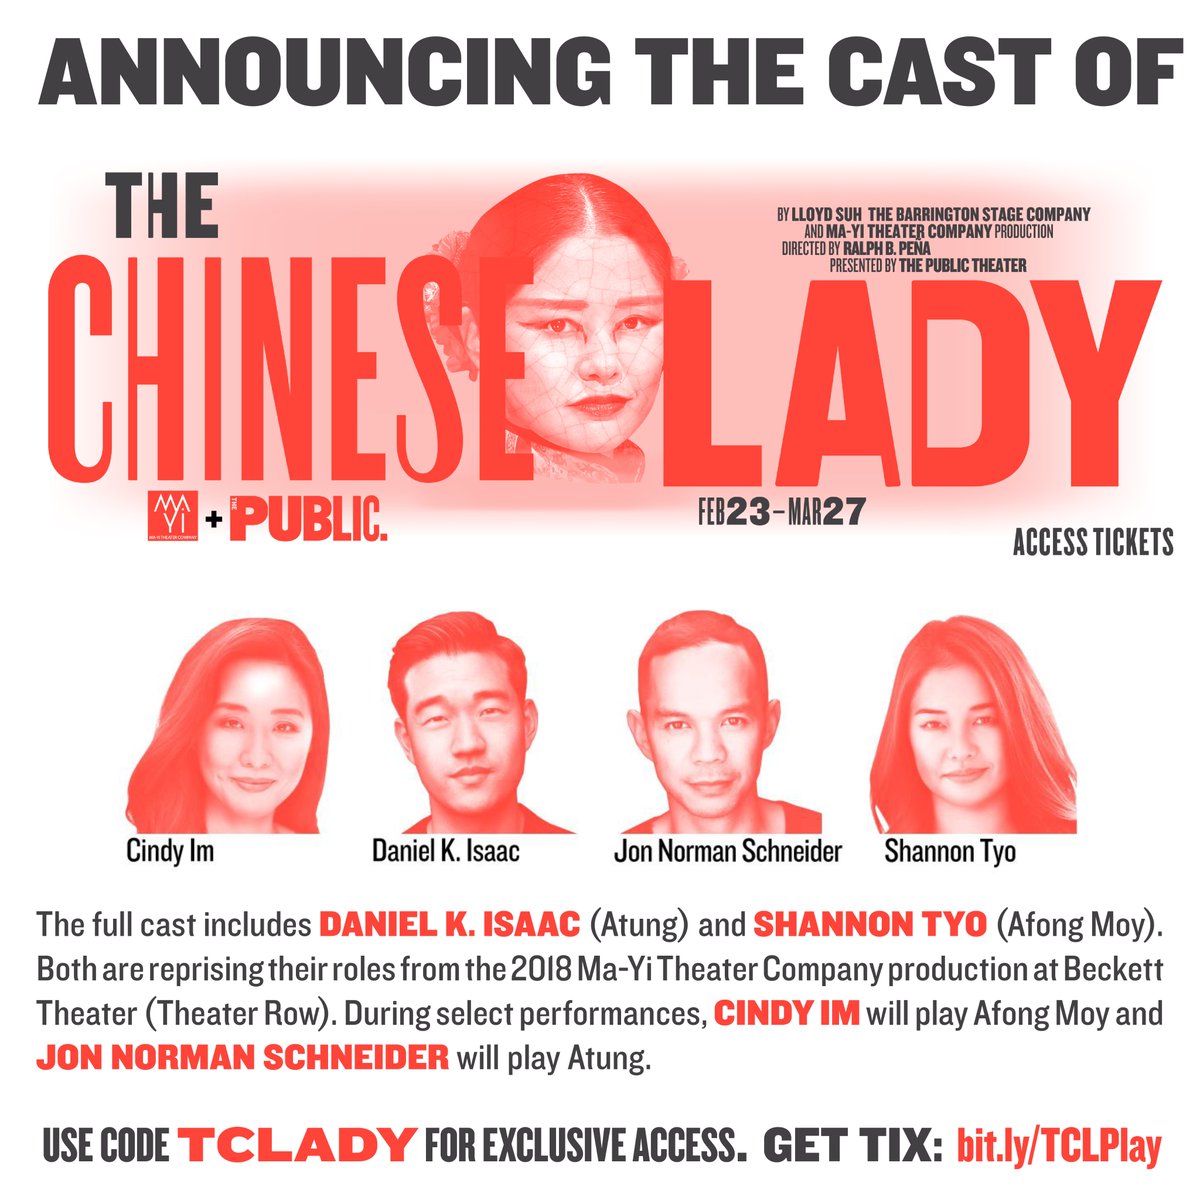 We ❤️ that the powerhouse acting team of Shannon Tyo and Daniel K. Isaac — from the 2018 BSC World Premiere &amp; @MaYiTheater productions — are returning to @PublicTheaterNY's production of THE CHINESE LADY! 